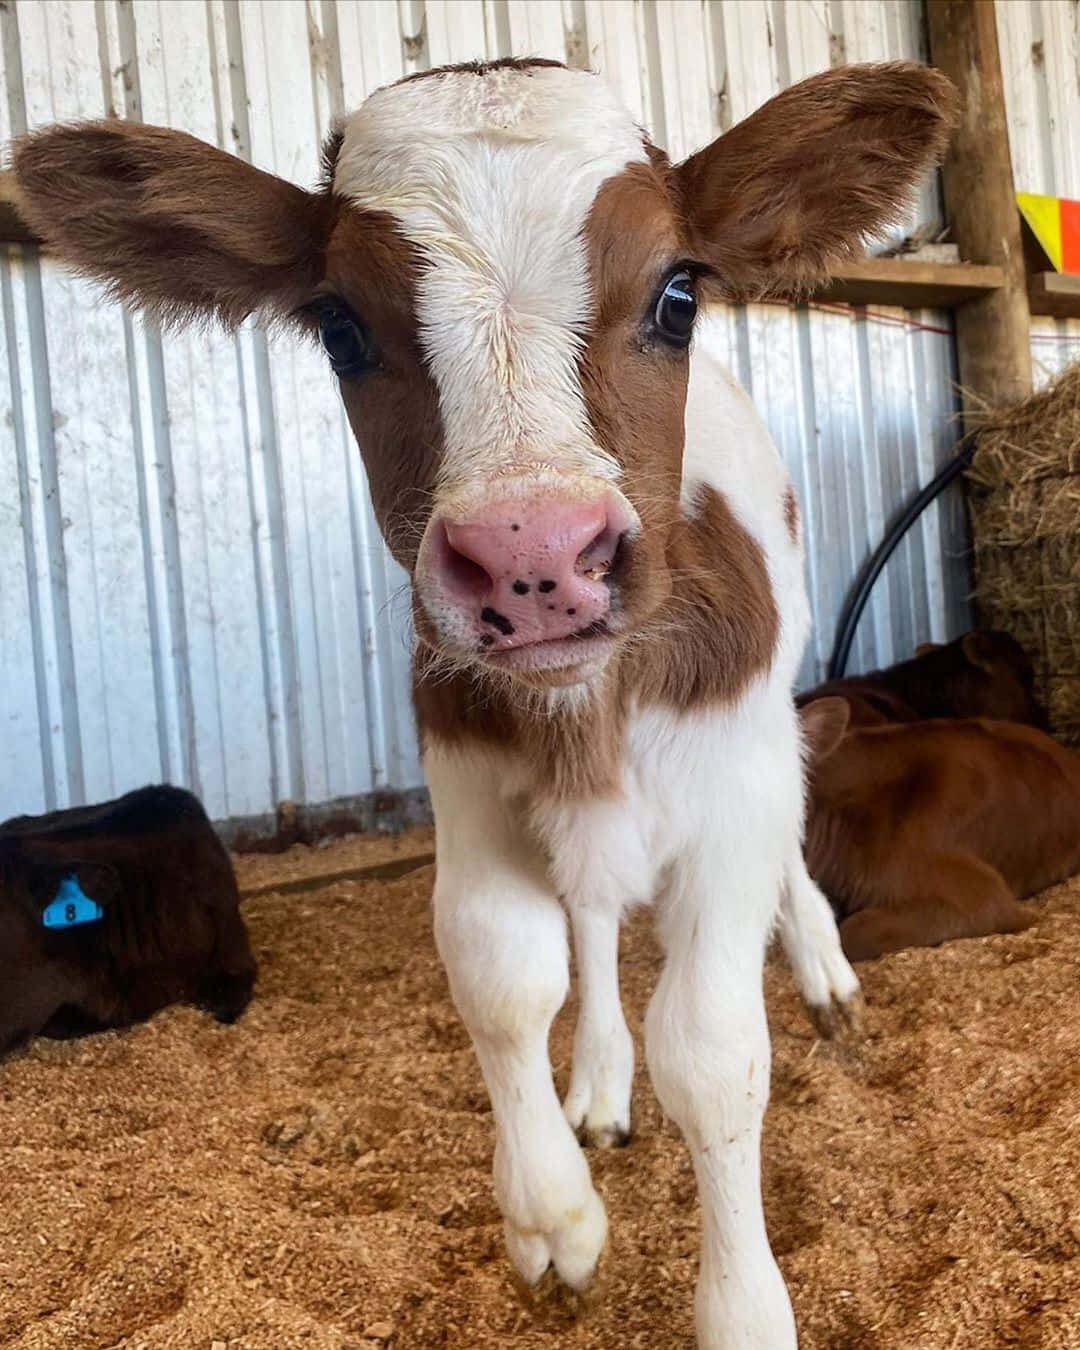 Say hello to the cutest cow ever!